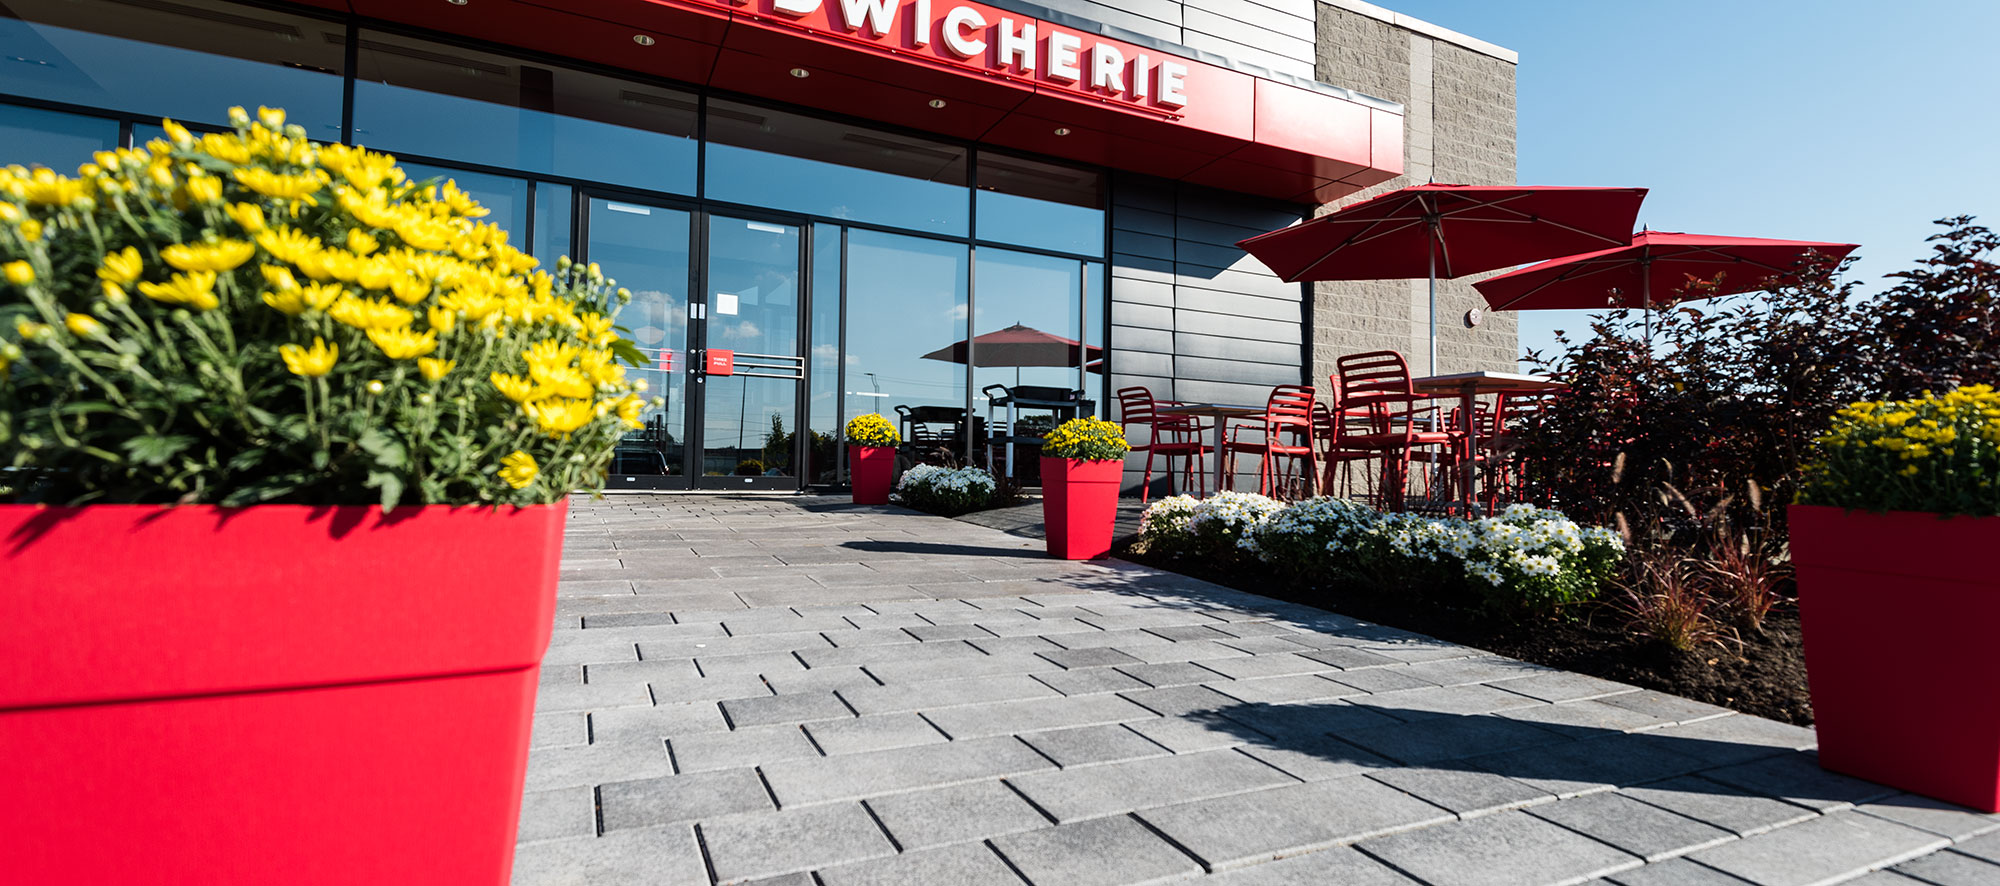 Artline pavers, landscaping and an outdoor dining area with umbrellas and planters matching the red theme, lead to Boulangerie Paillard.